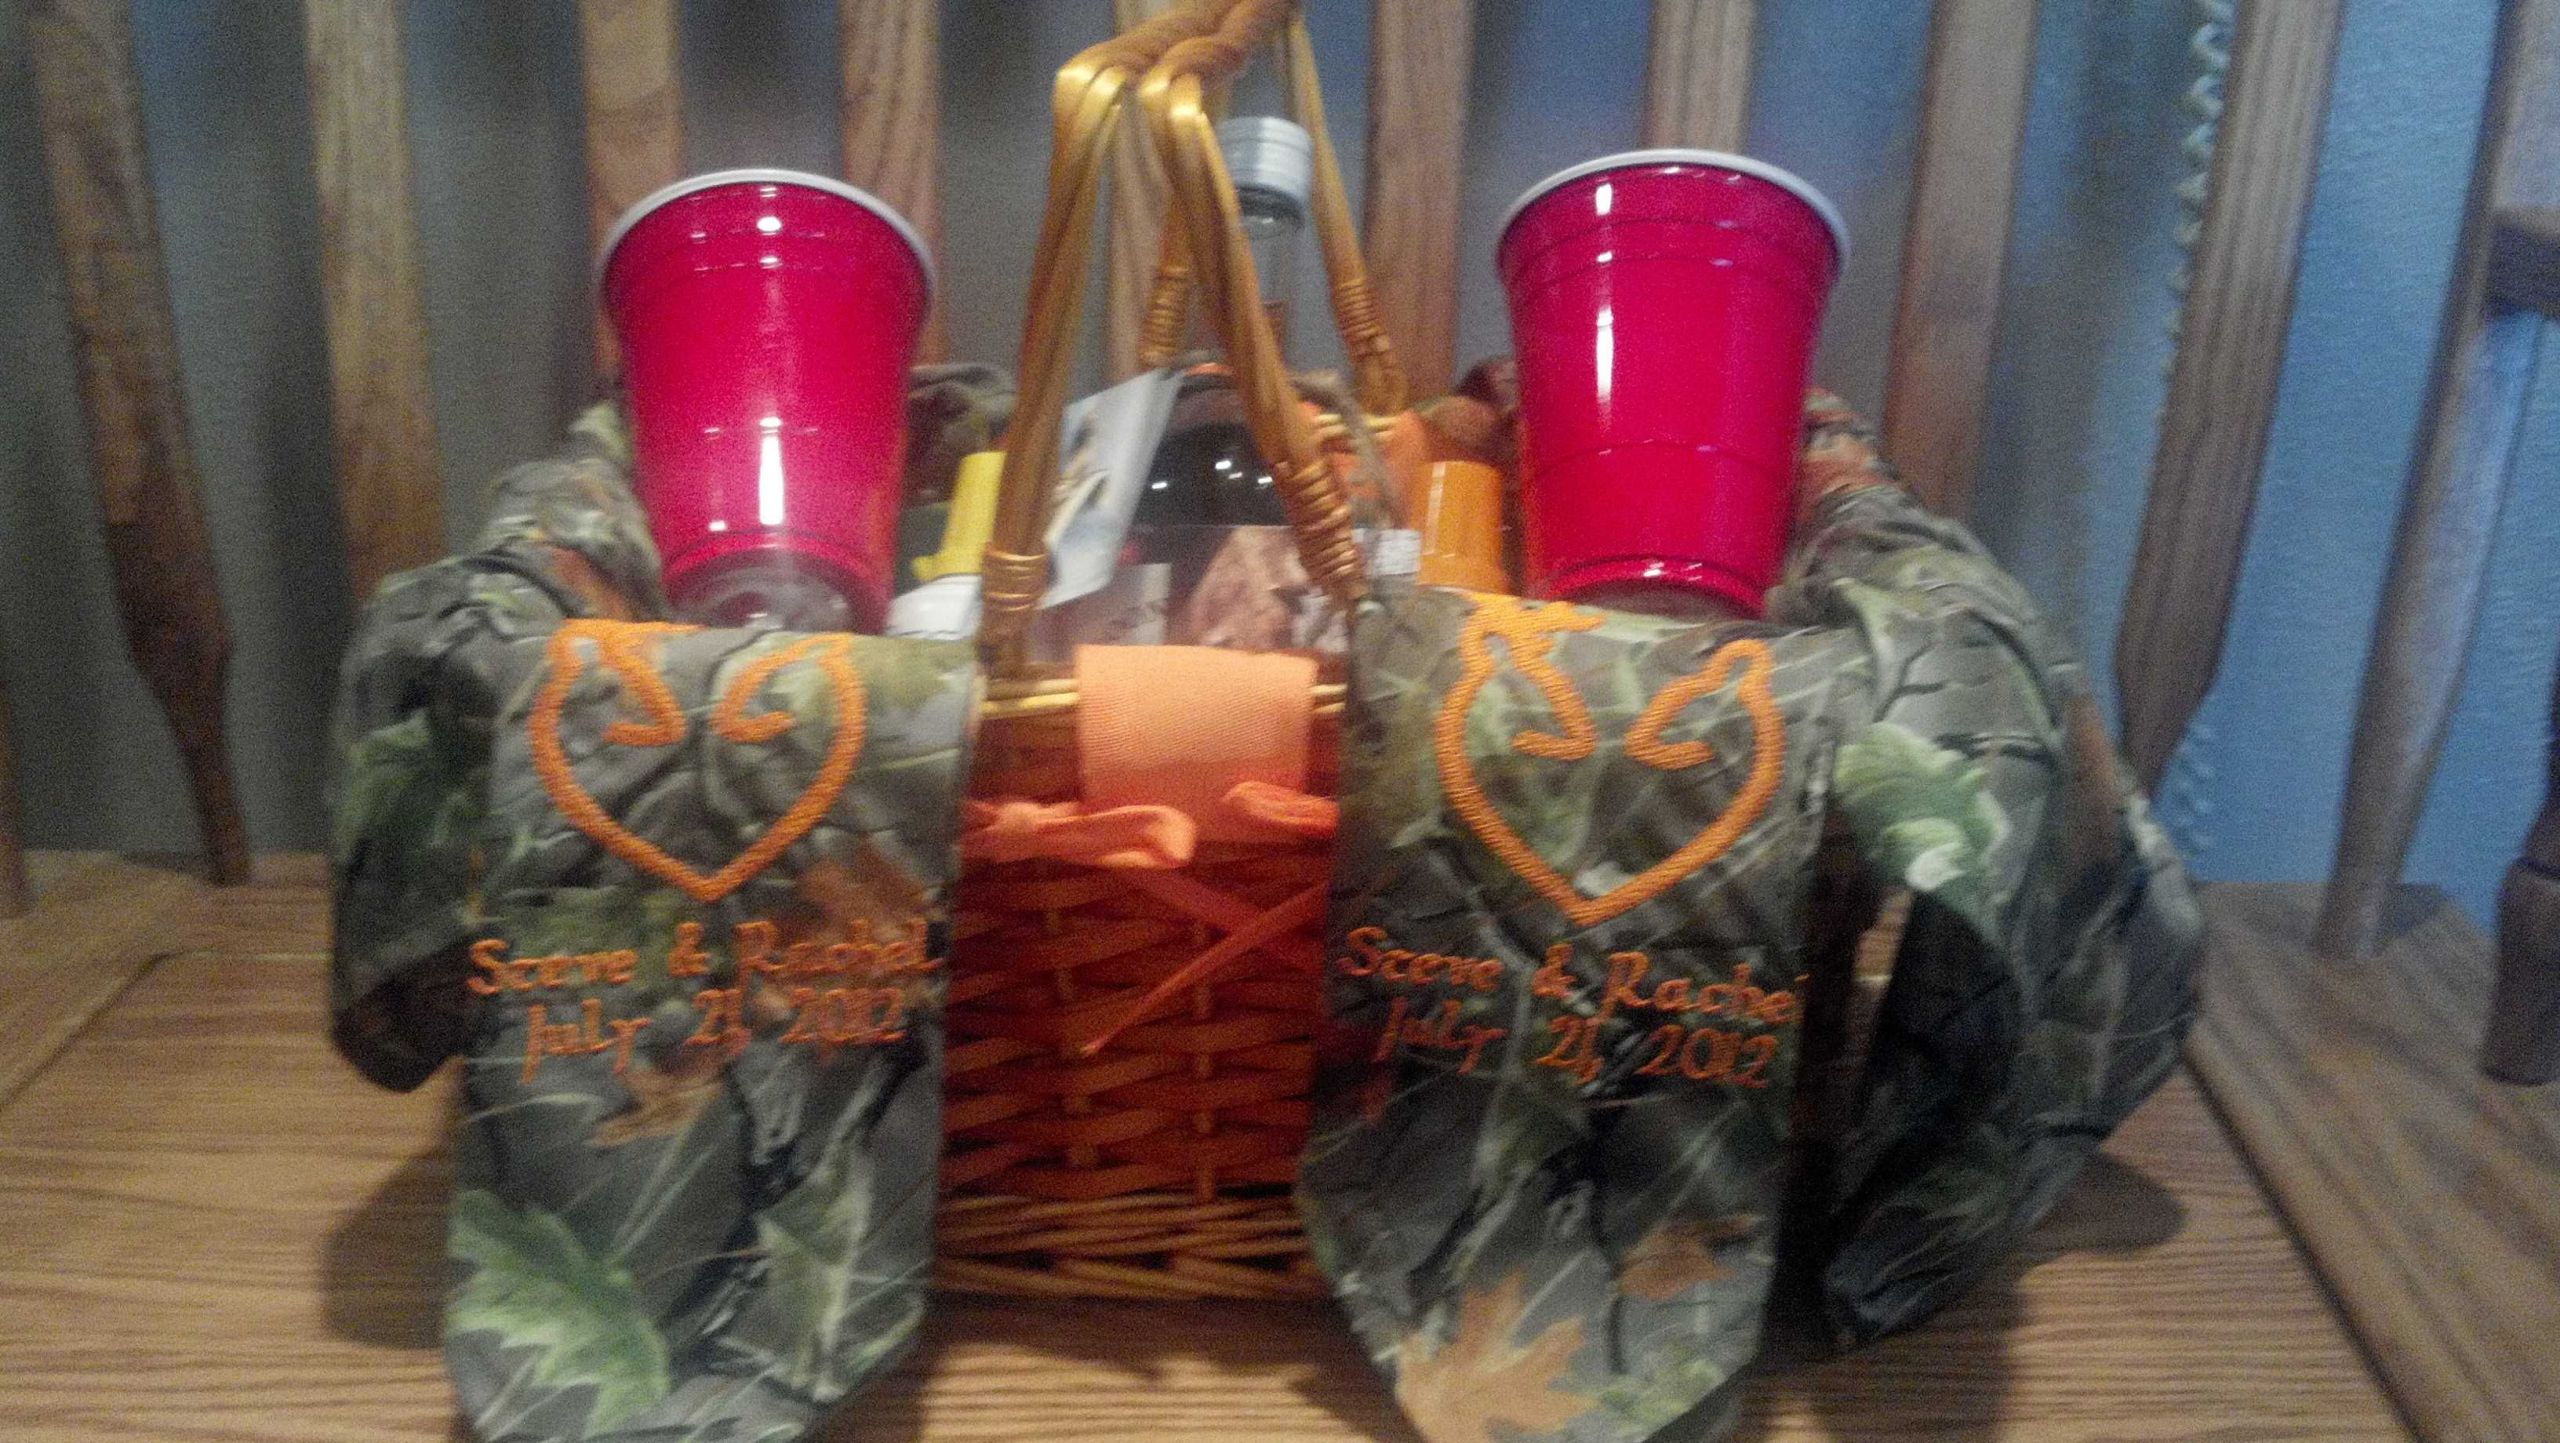 Redneck Gift Baskets Ideas
 Pin on Auction Baskets and Other Great Auction Ideas